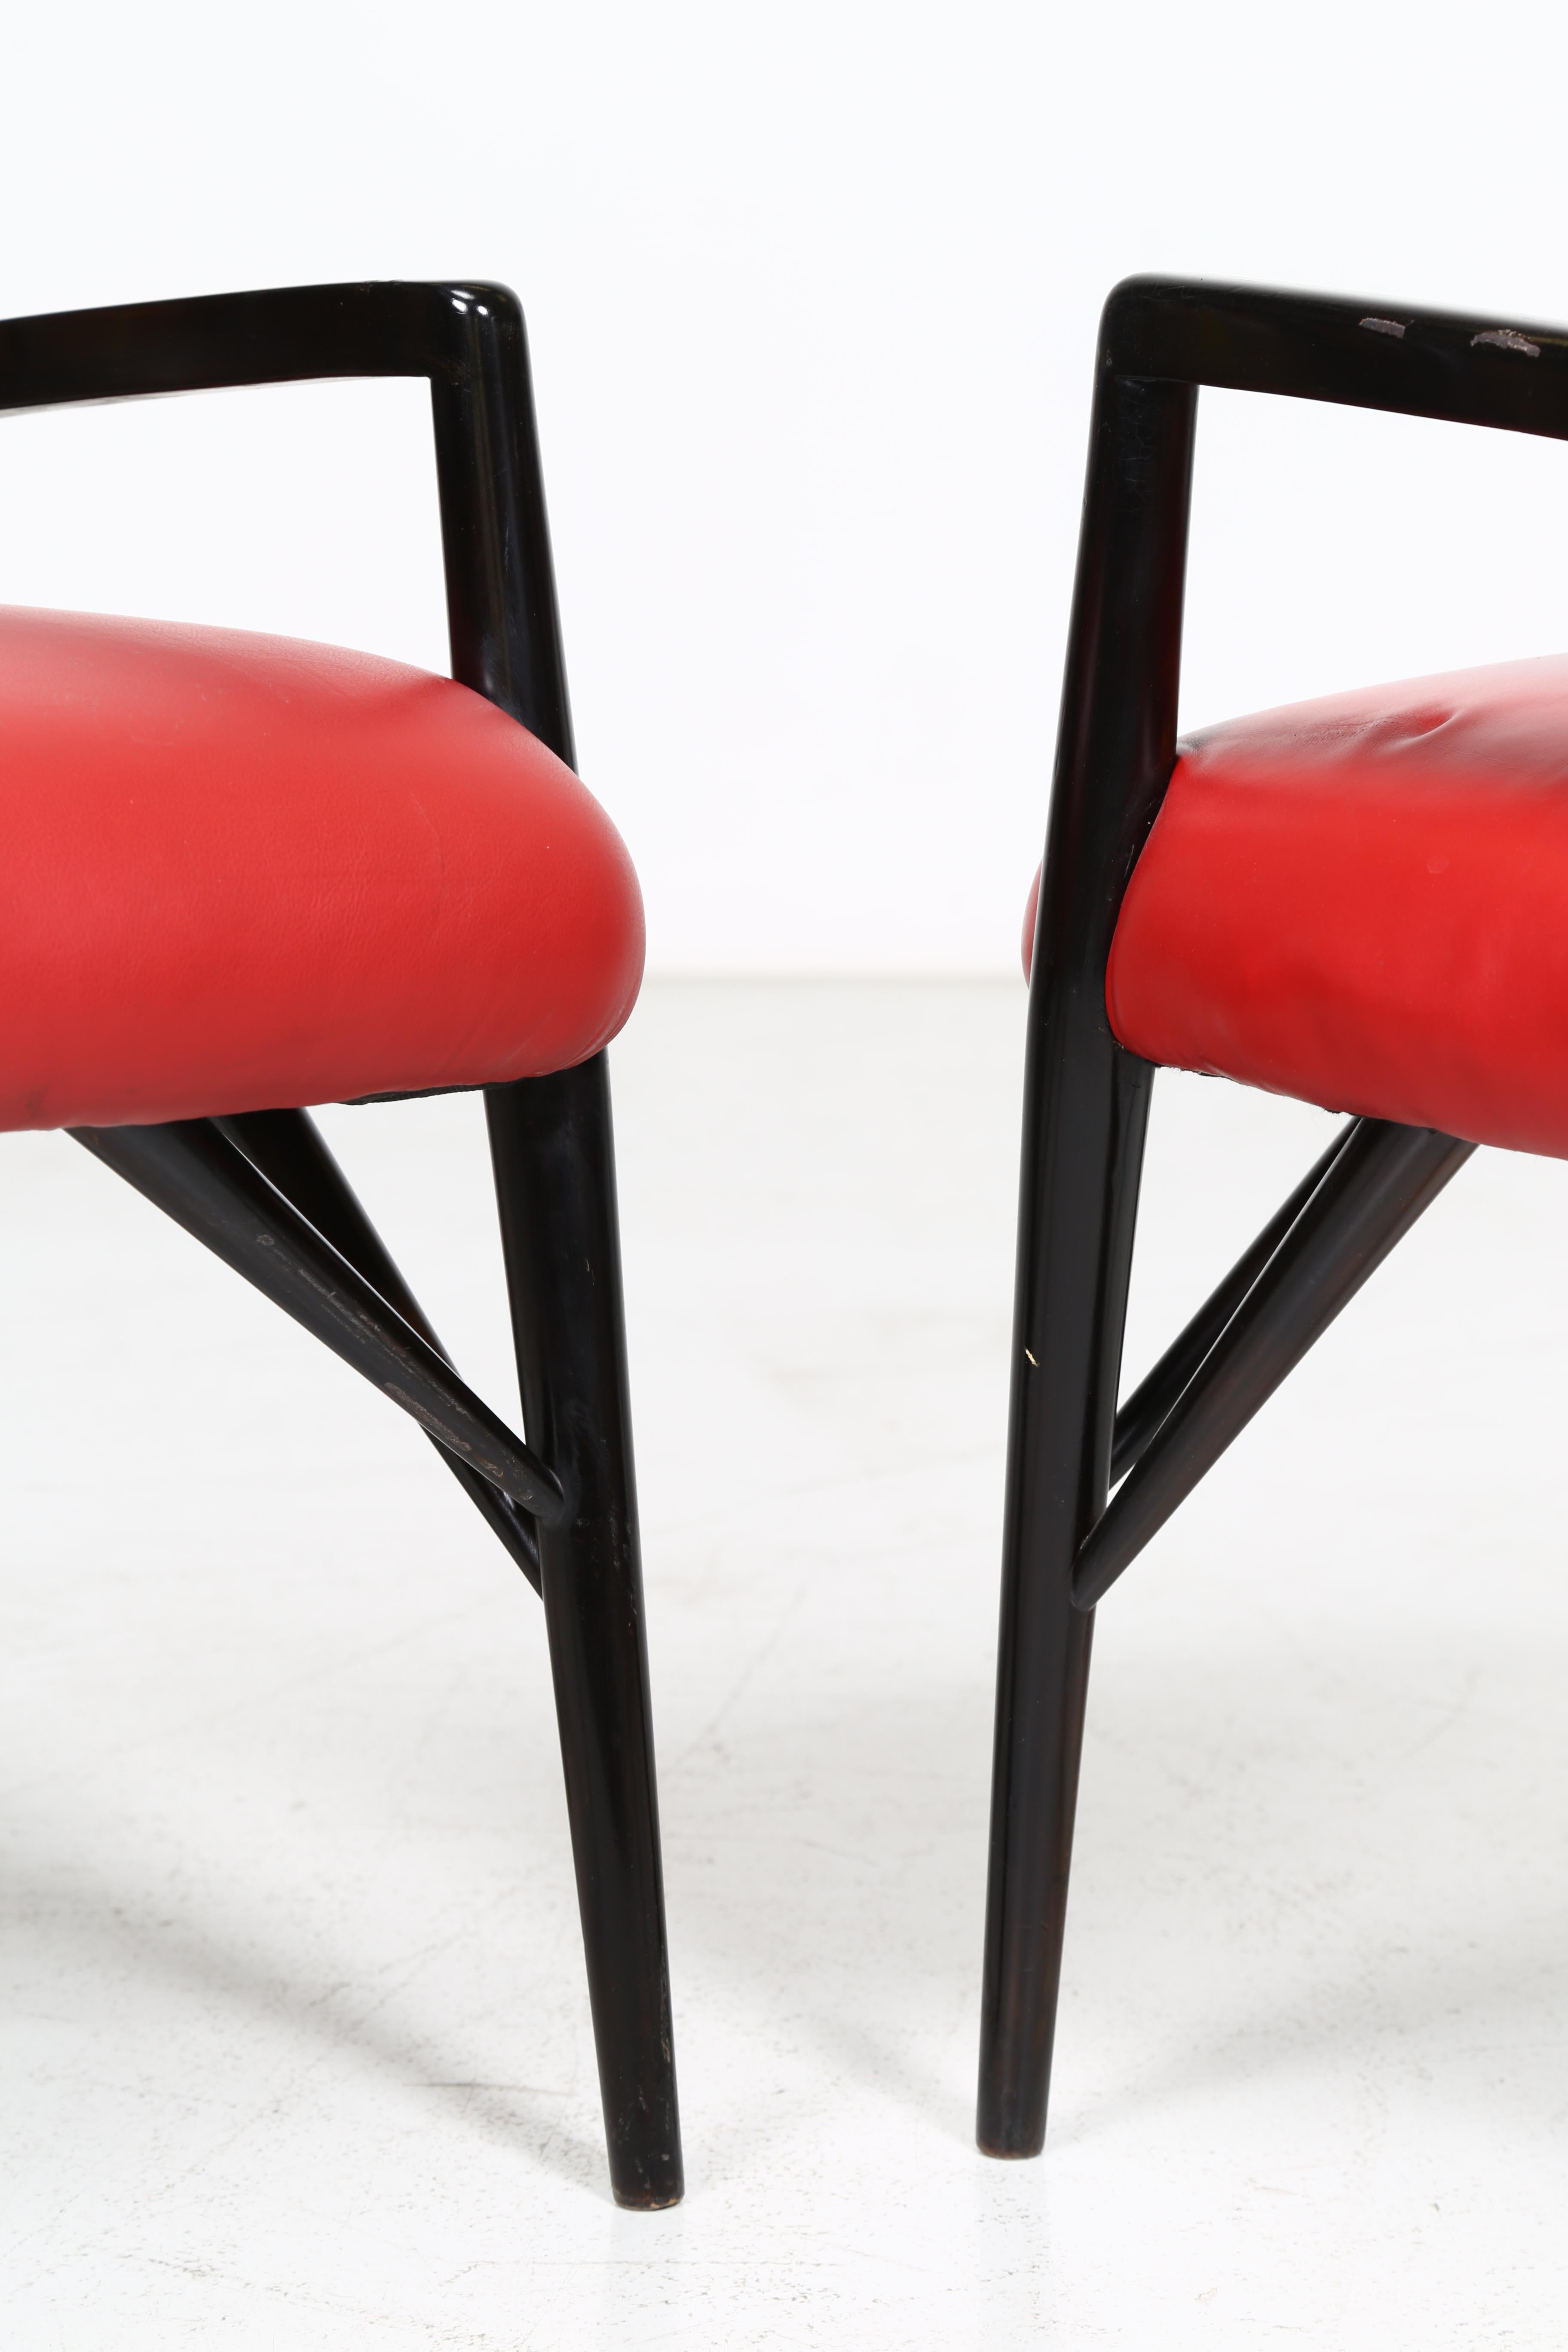 Paul Laszlo Set of Four Chairs in Black Lacquered Wood, 1950s For Sale 3